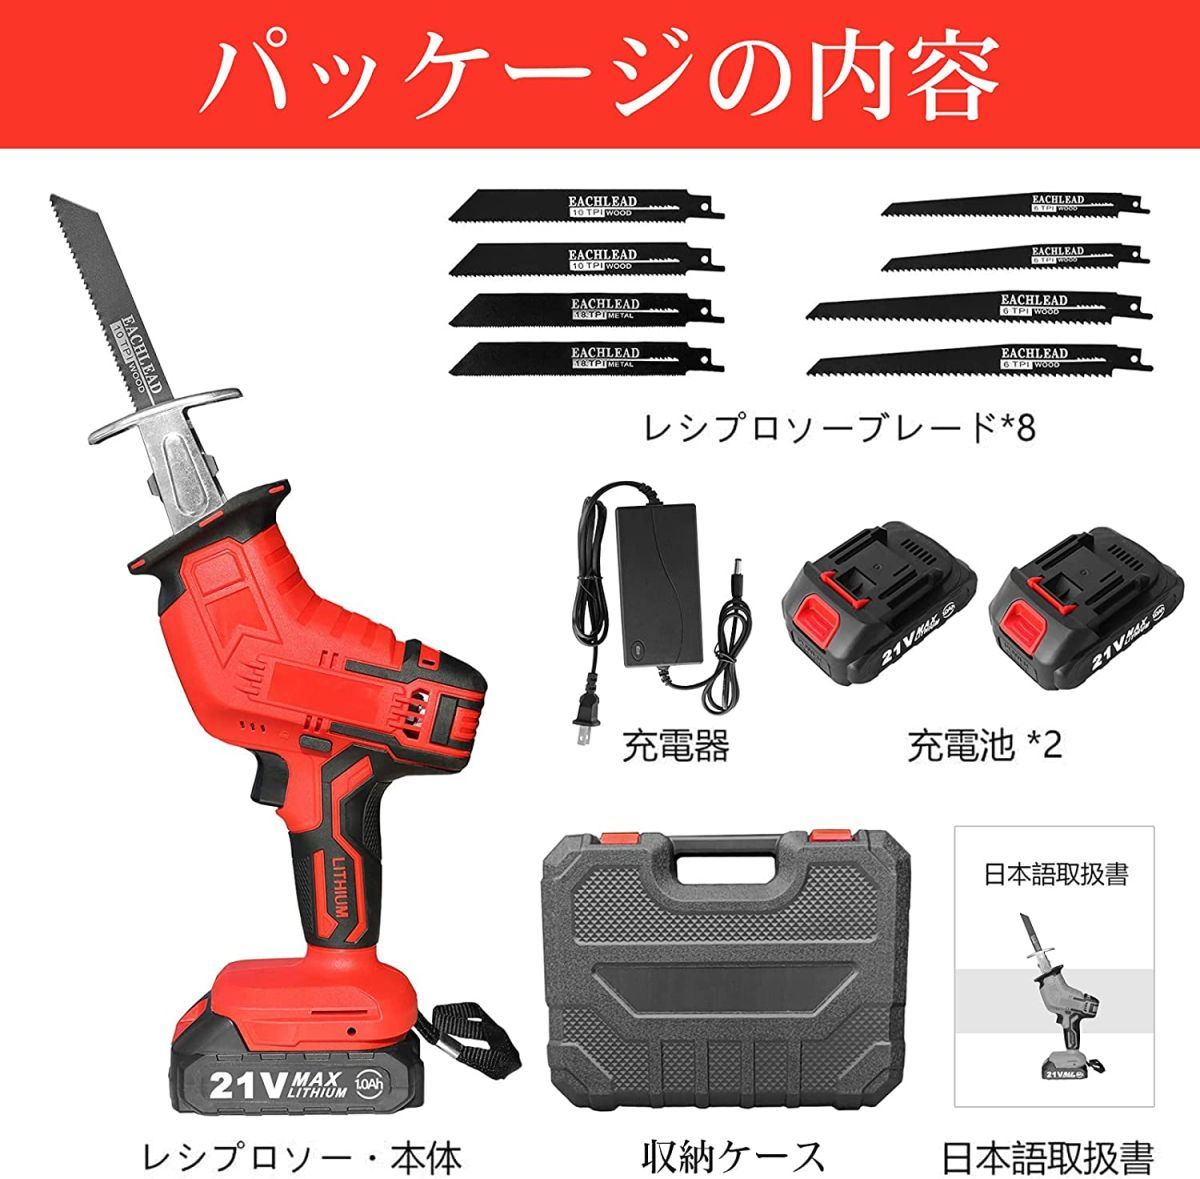  electric saw 21V rechargeable reciprocating engine so- charge saw continuously variable transmission cordless reciprocating engine so- razor 8ps.